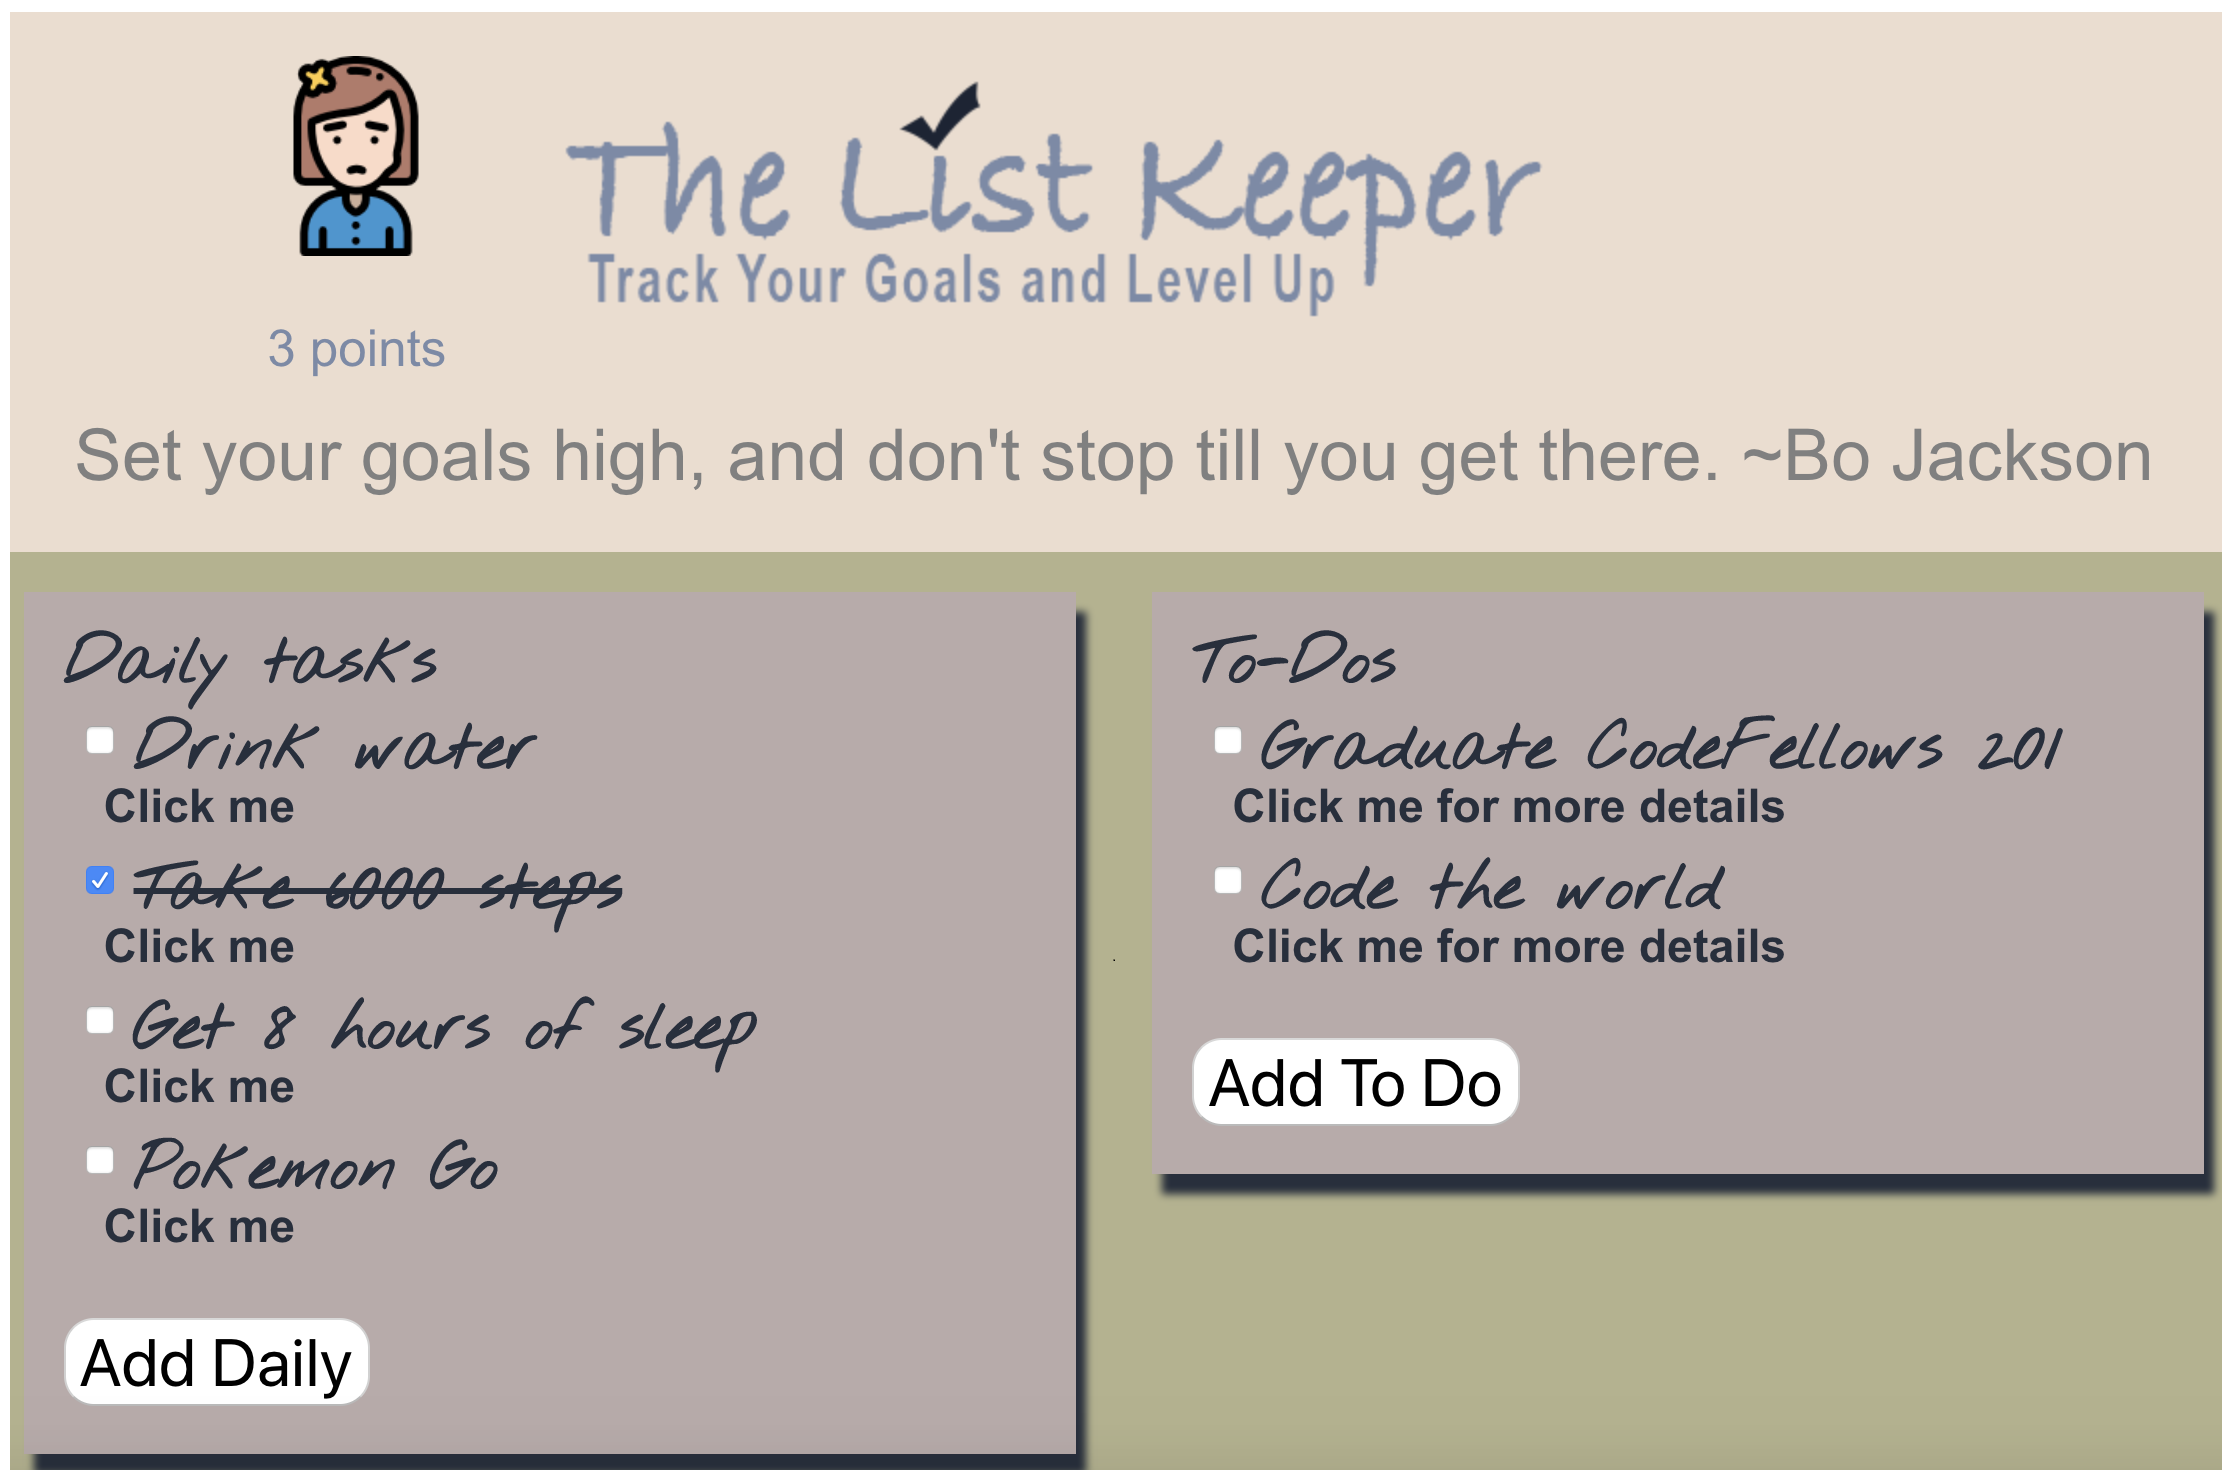 An image and link to the List Keeper project.